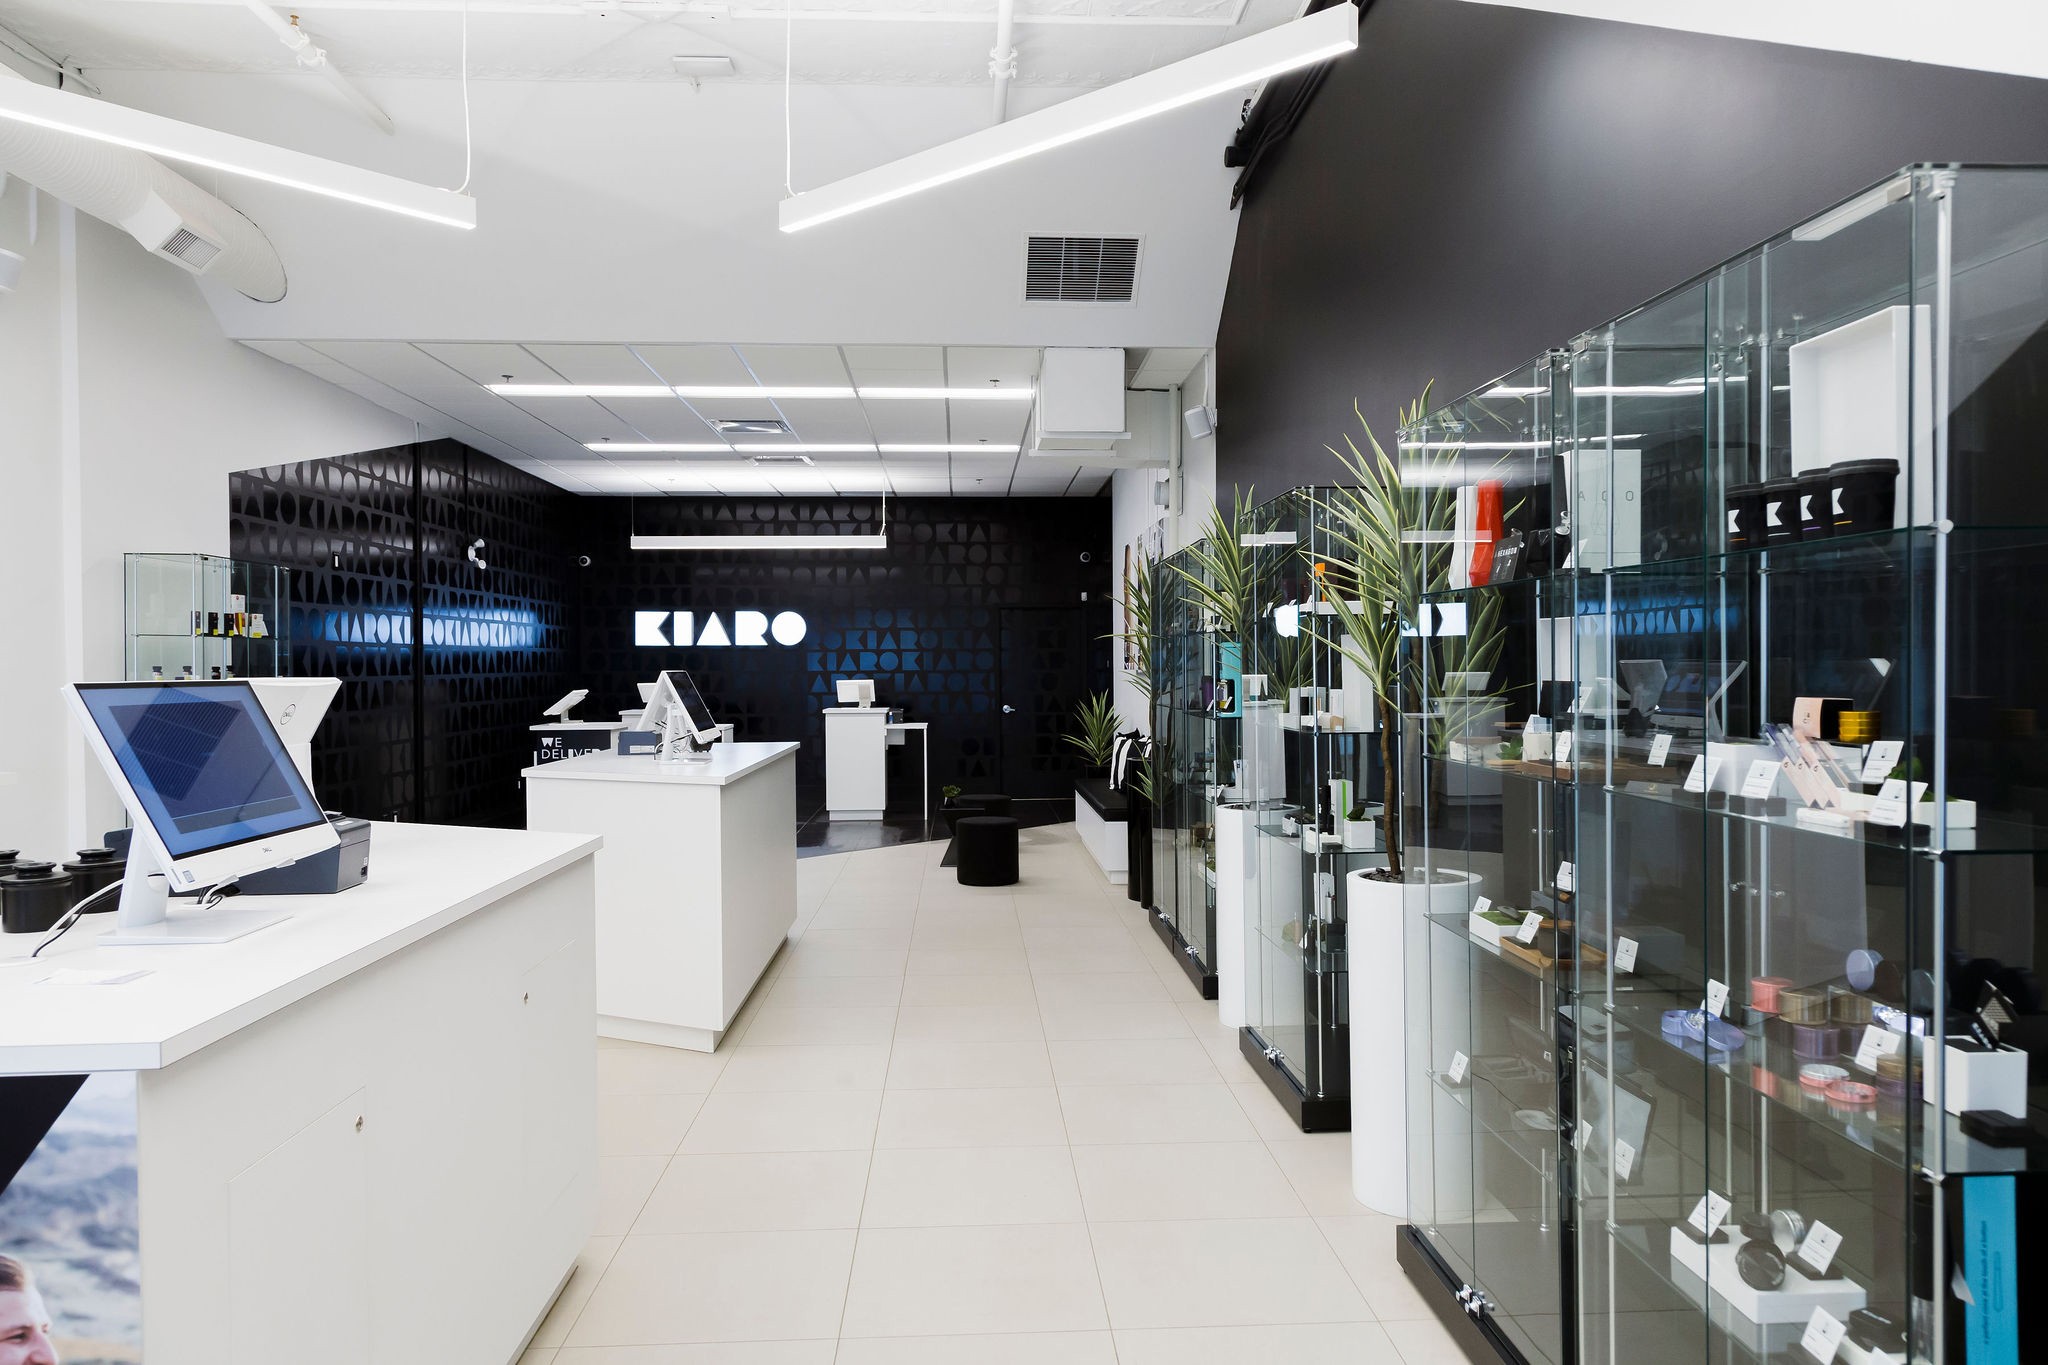 Kiaro in Saskatoon SK Cannabis Retail Design Retail interior and product cases by Cutler